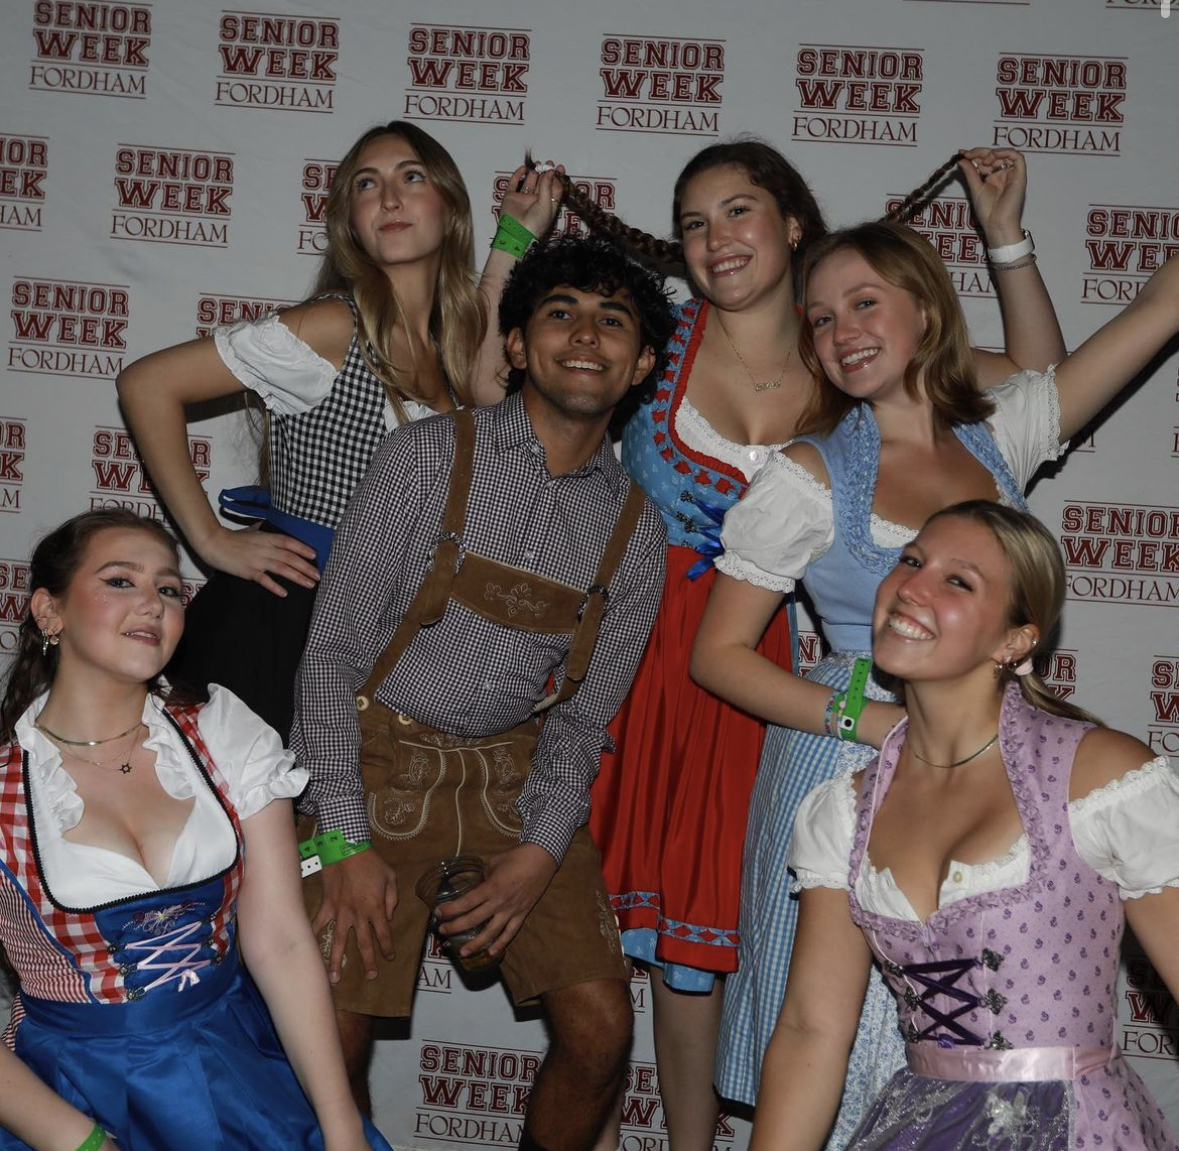 The Oktoberfest event, which has been held in years past, was an opportunity for current seniors to reflect on their time at Fordham, connect and network with other seniors and celebrate the rest of the exciting year ahead. (Courtesy of Instagram)